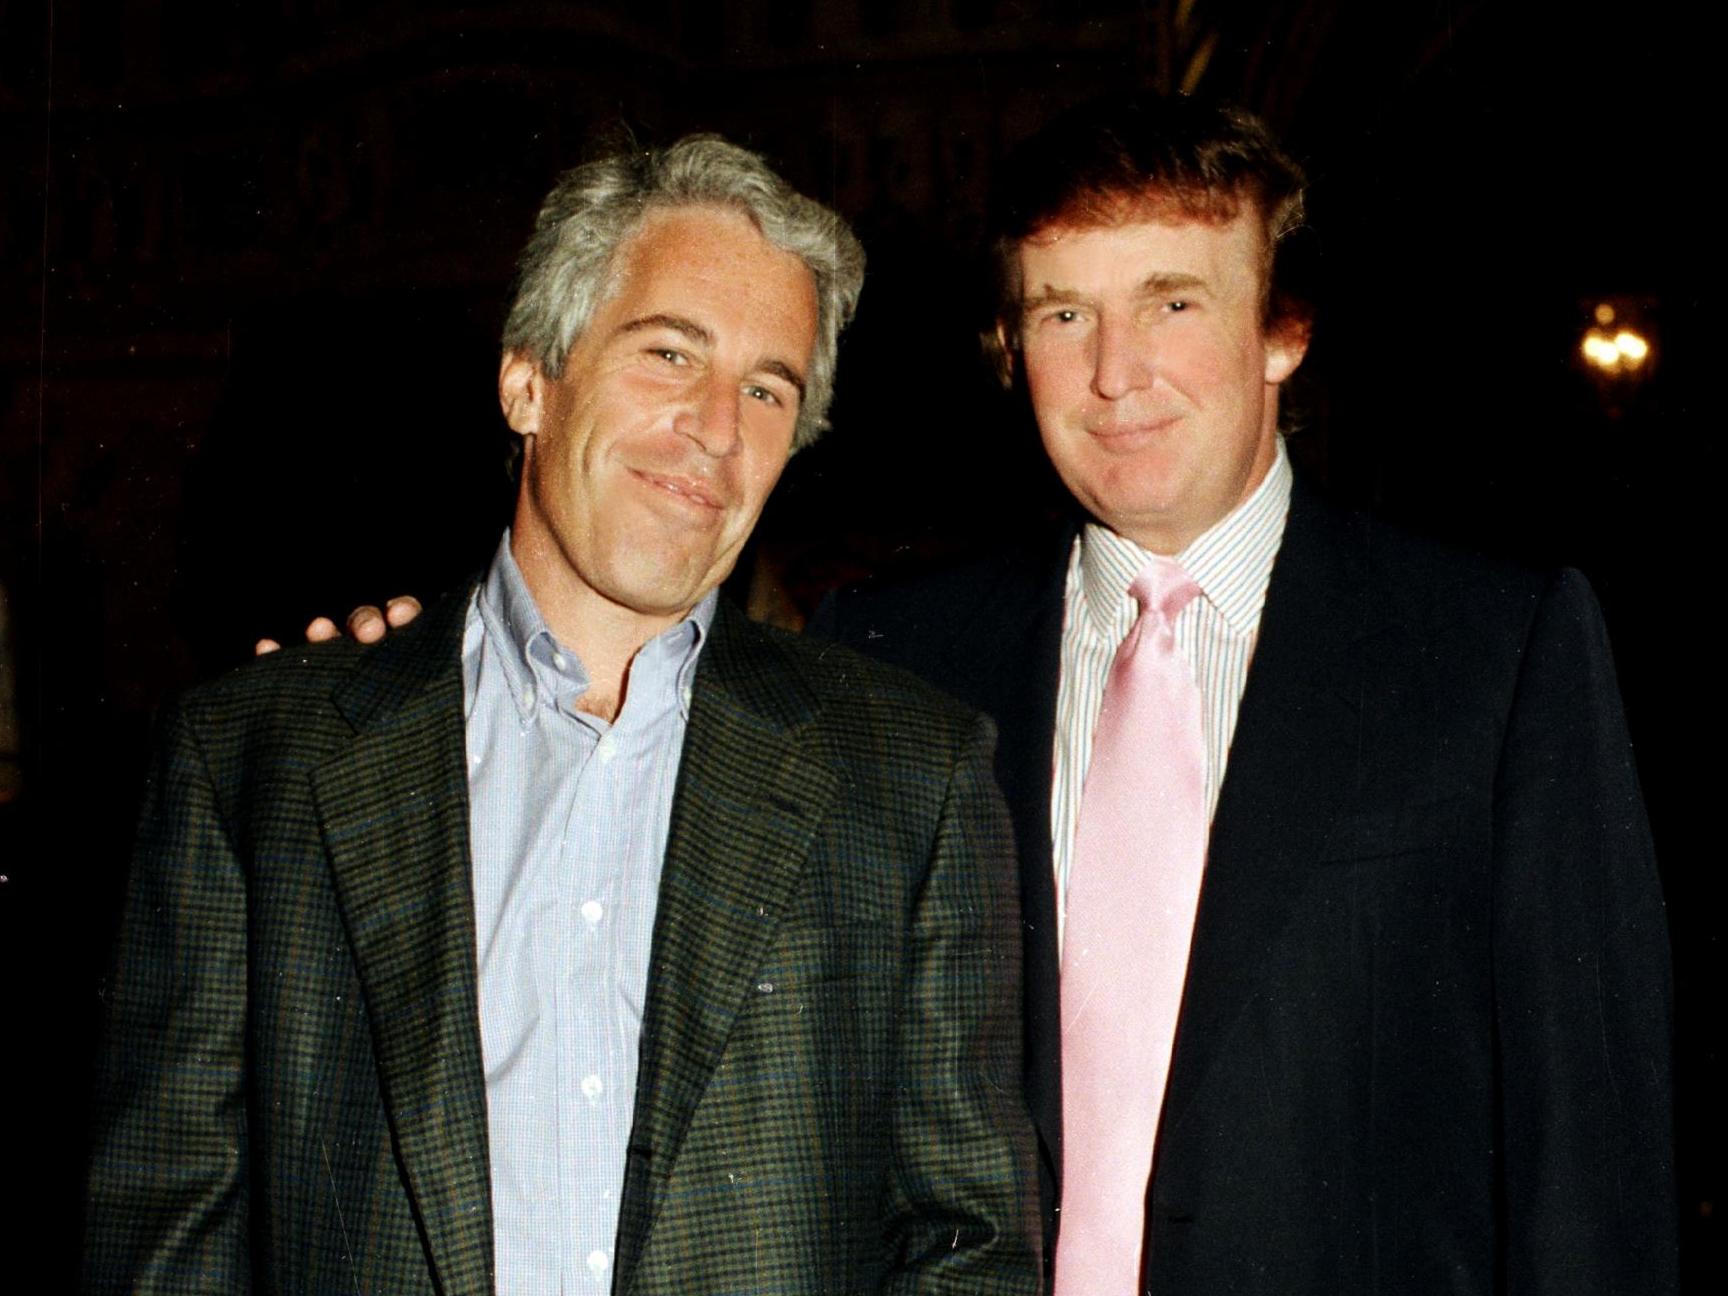 Former president Donald Trump is one of the people whose contact information was listed in Epstein’s ‘Little Black Book’